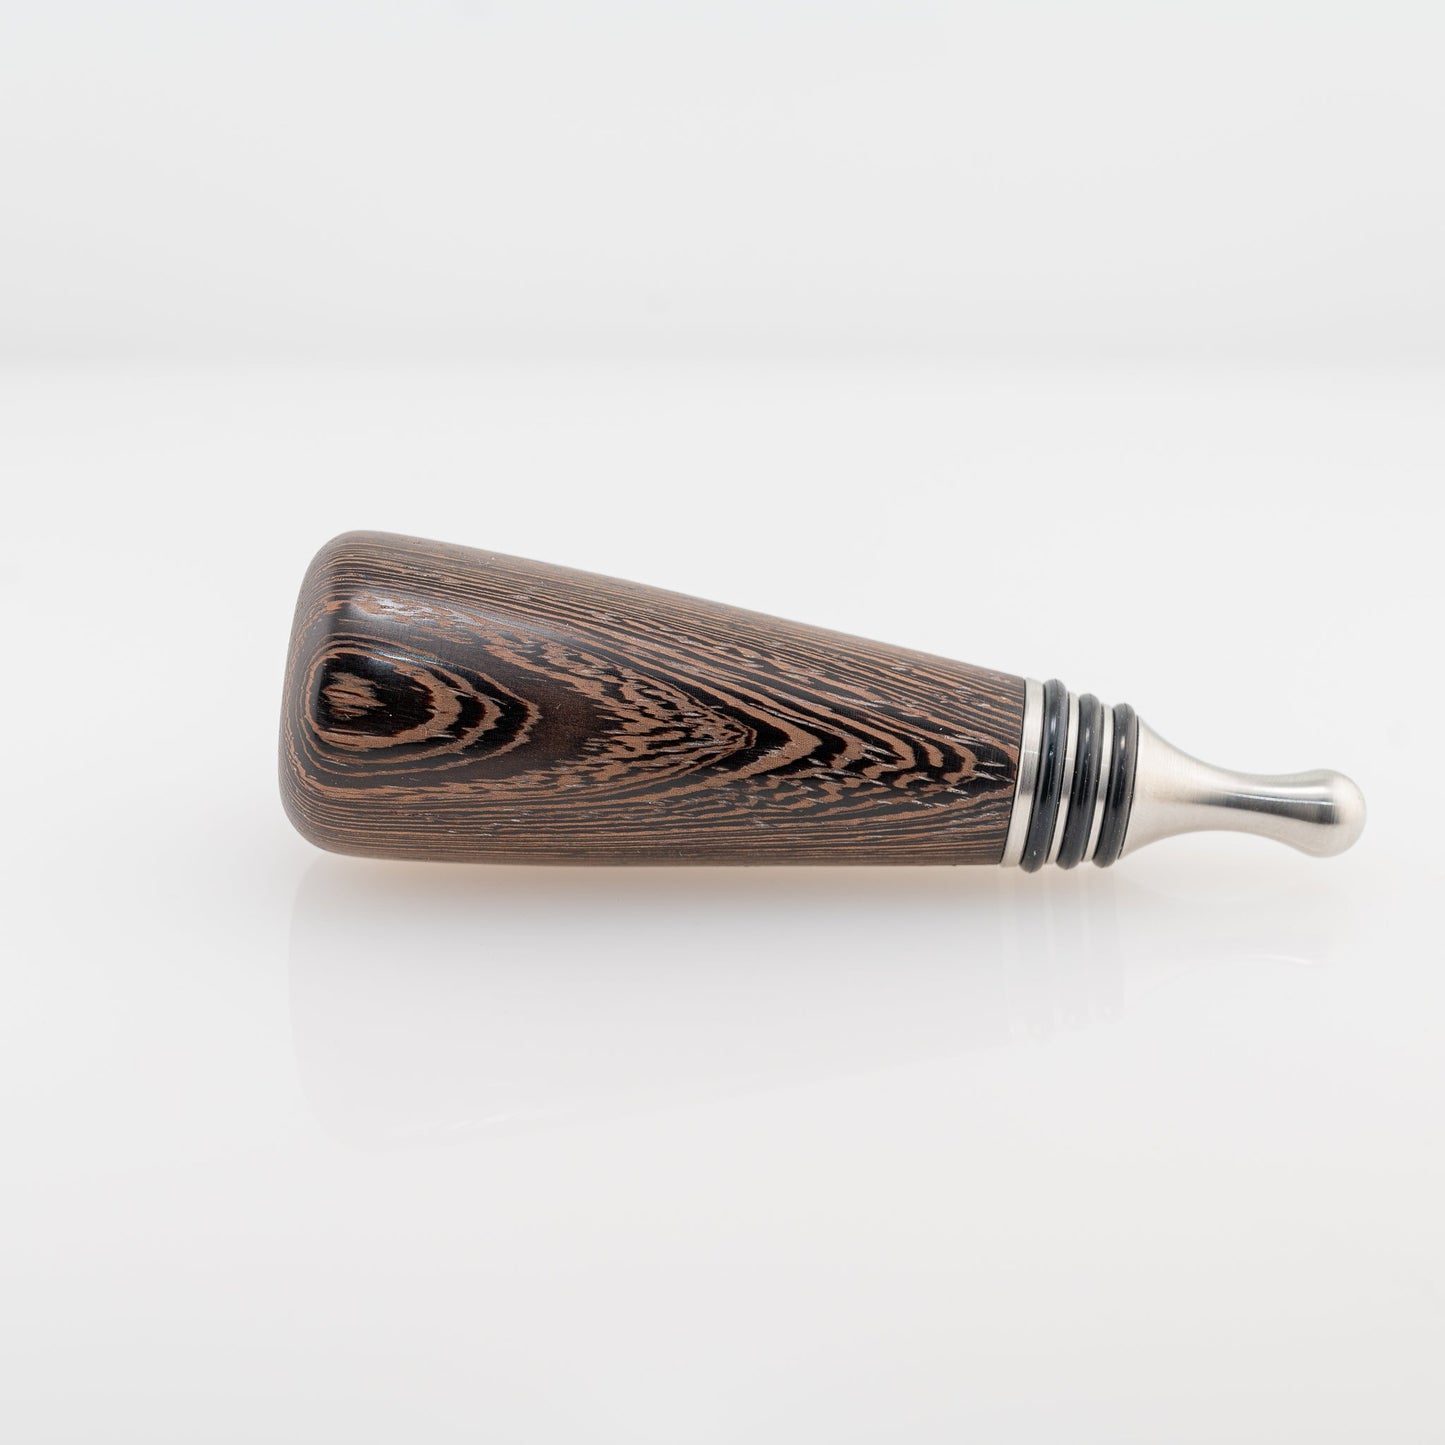 A hanmade Wenge wood bottle stopper rests on its side. The dropper is stainless steel with three black silicon gaskets.